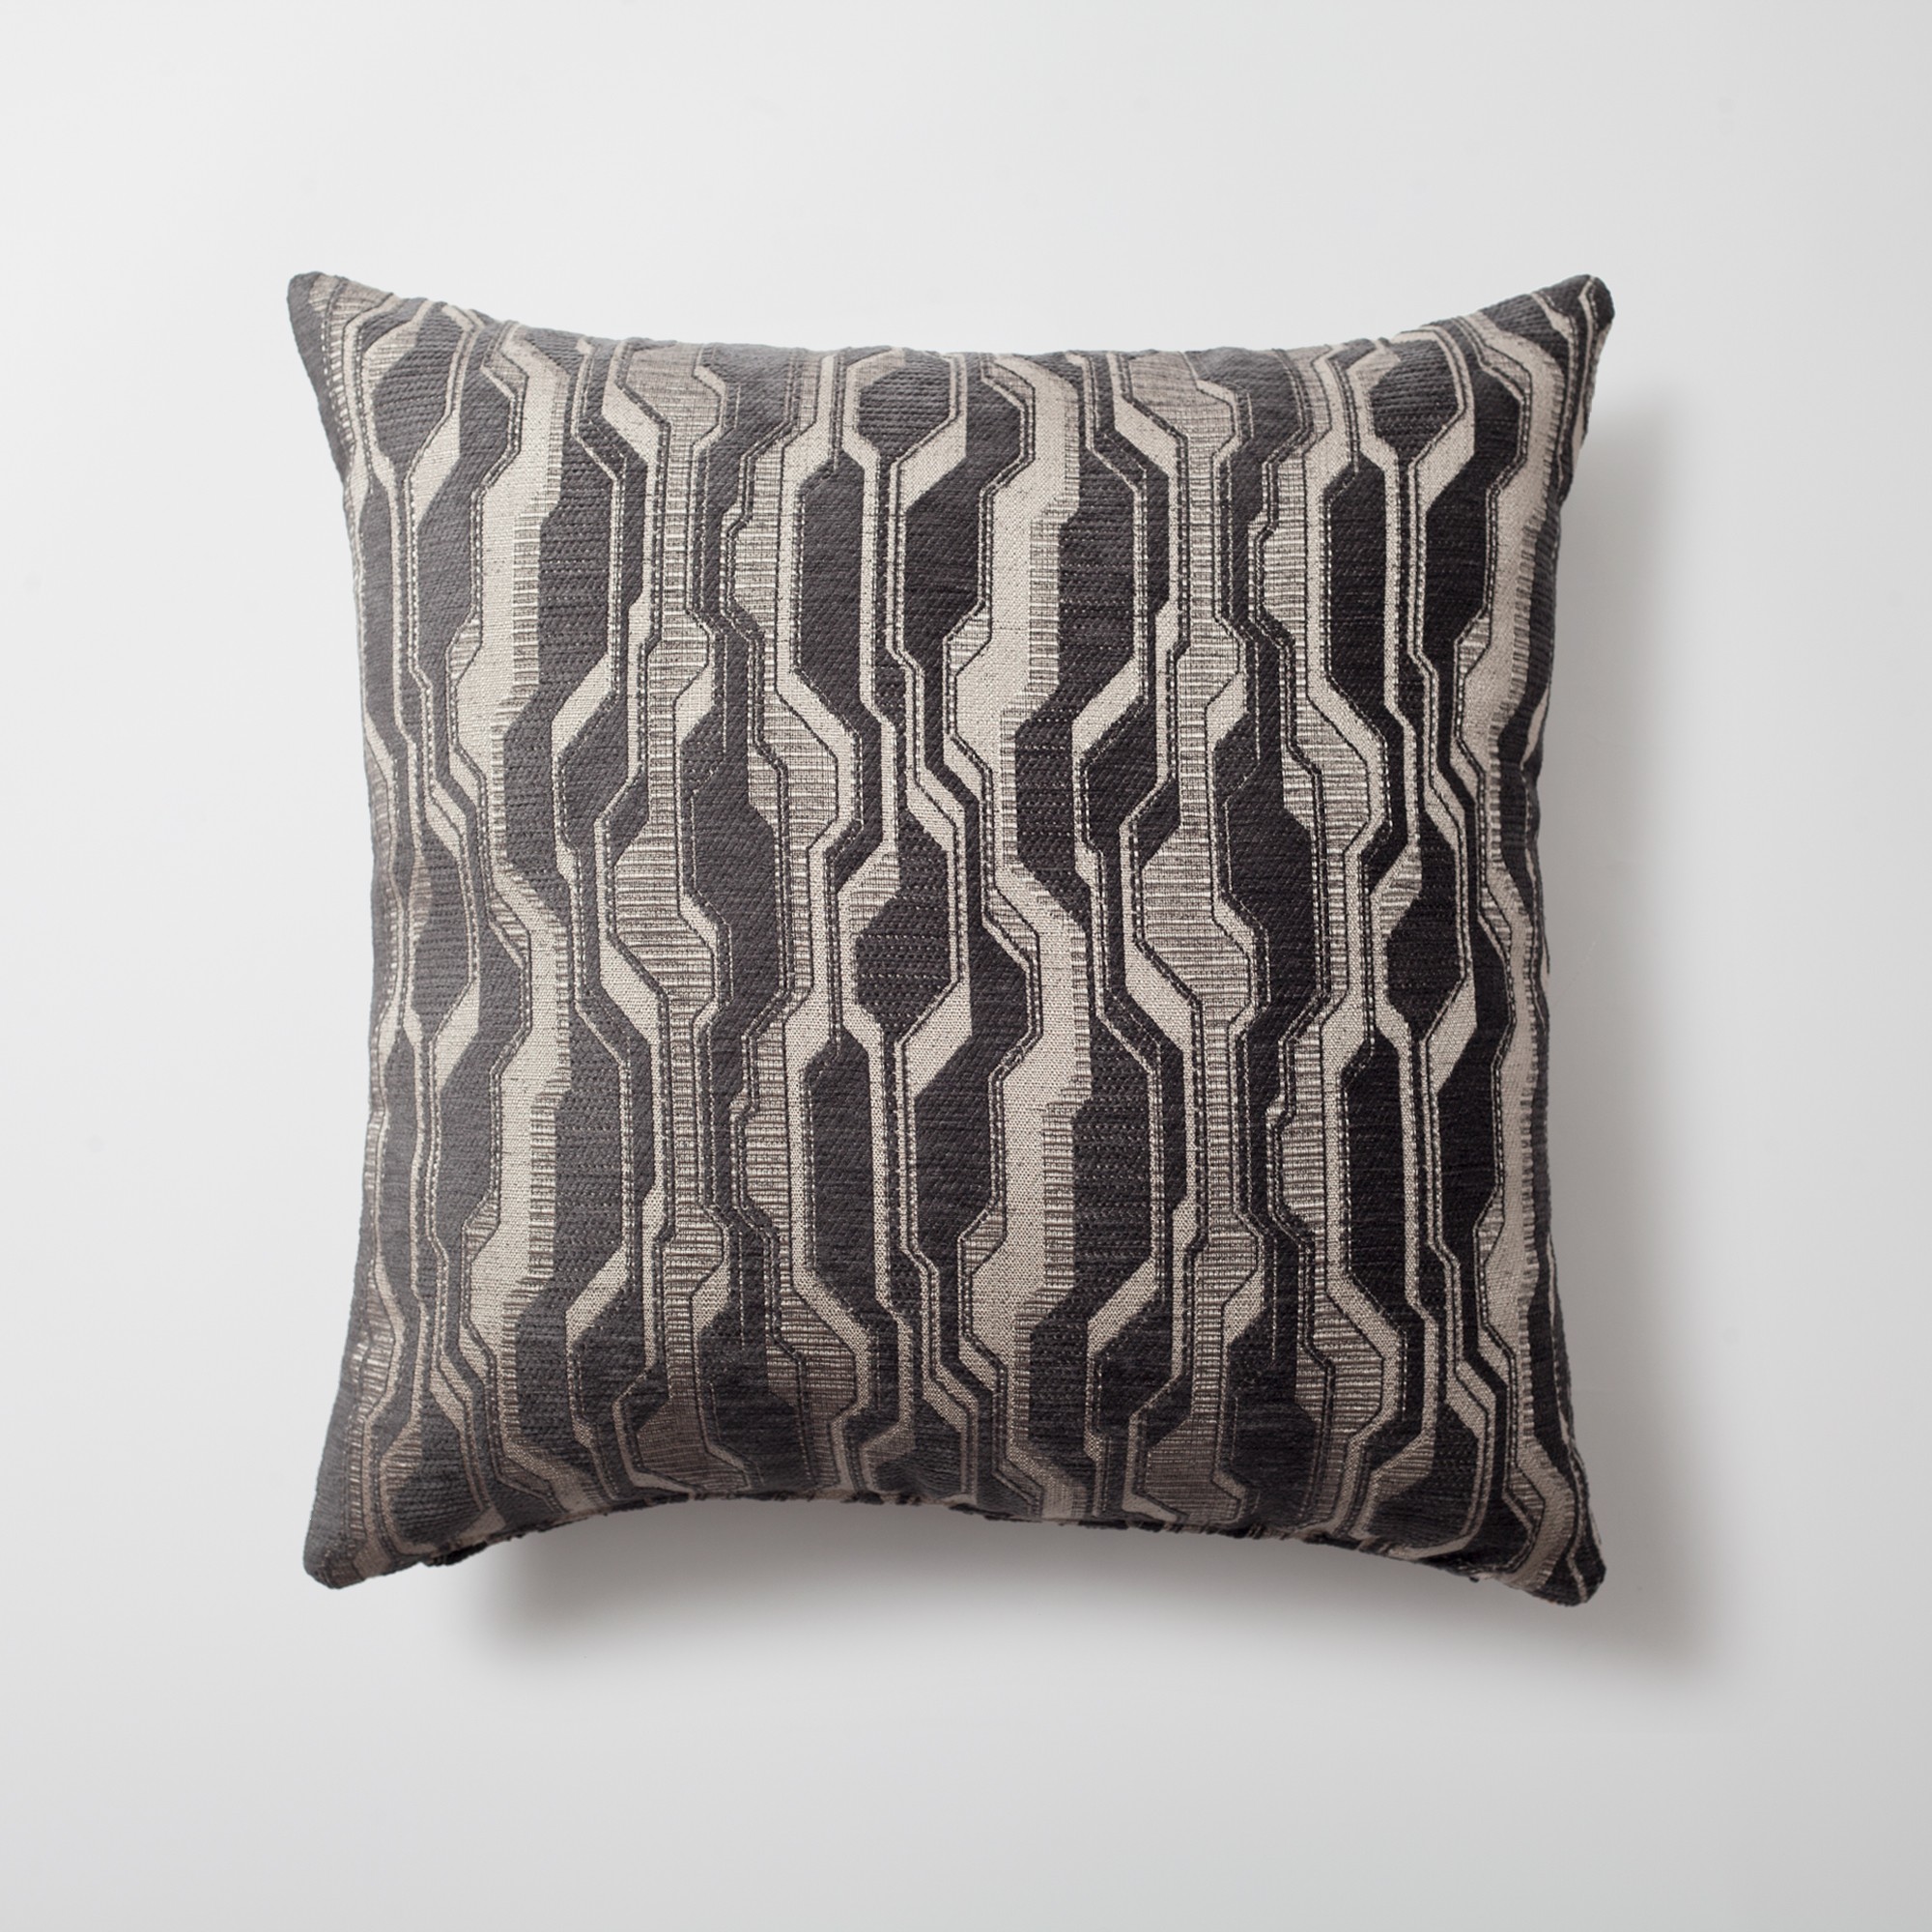 "Lebon" - Geometric Patterned 20x20 Inch Pillow - Anthracite (Cover Only)